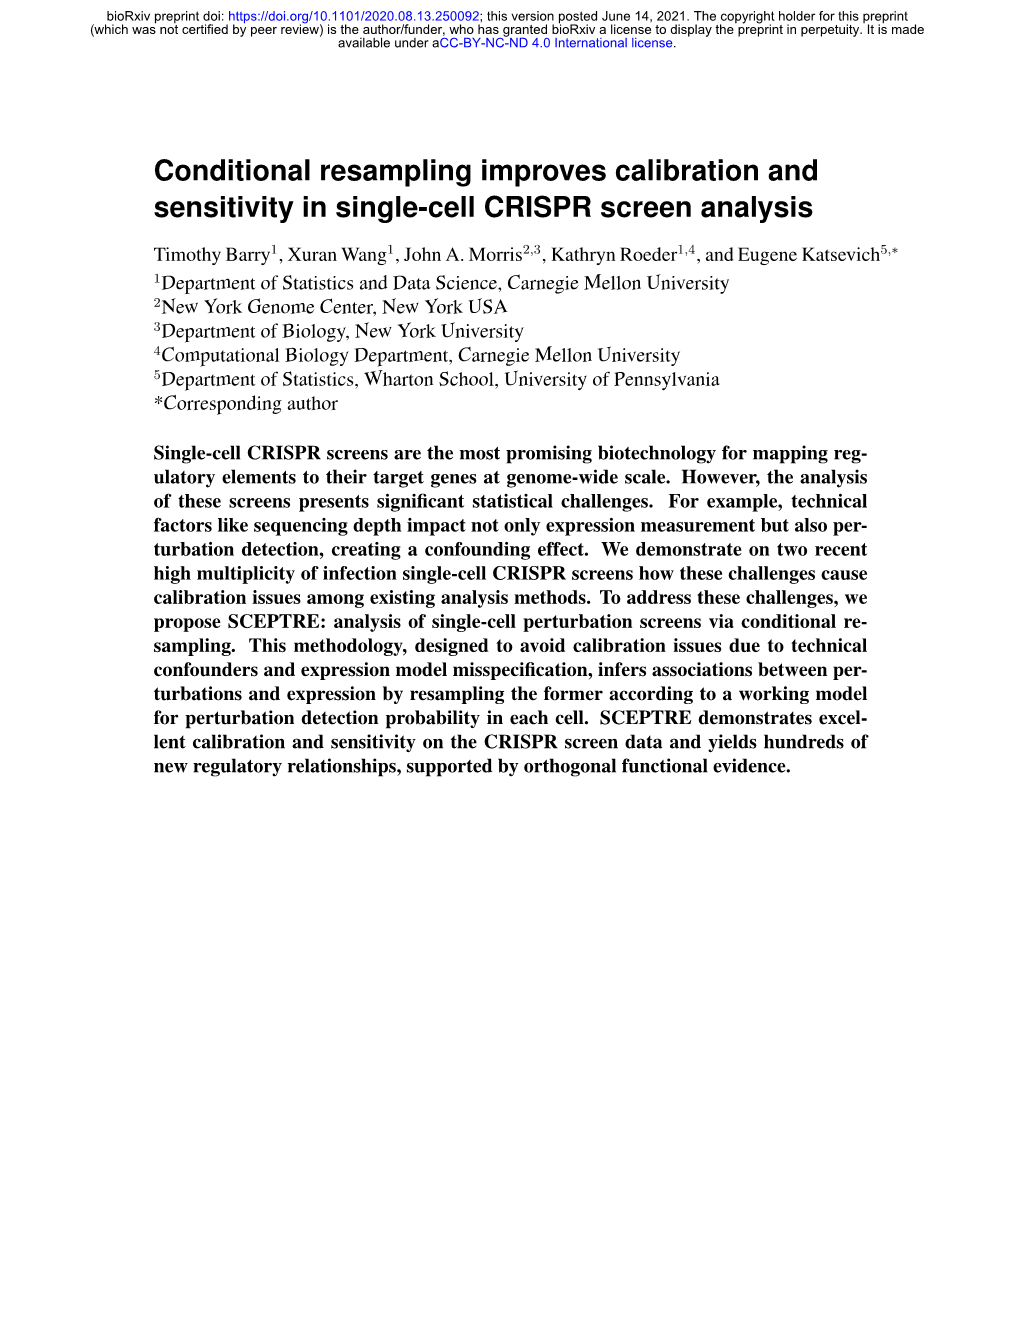 Conditional Resampling Improves Calibration and Sensitivity in Single-Cell CRISPR Screen Analysis